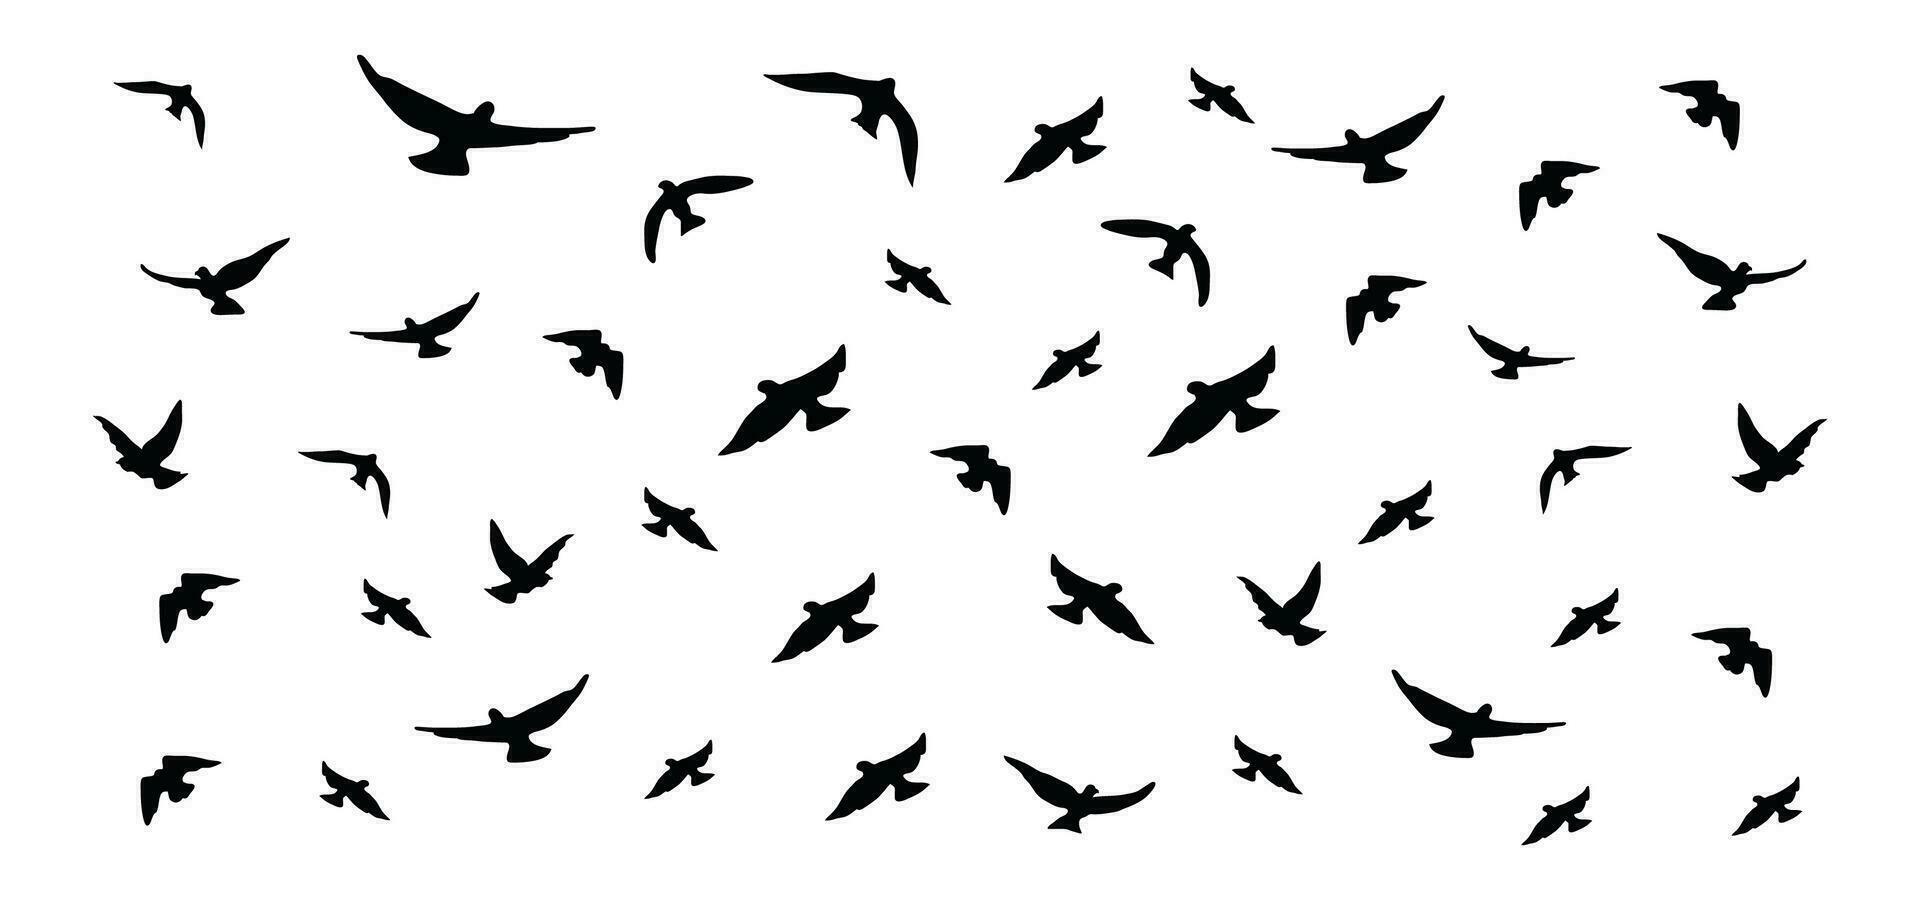 Silhouettes of flying birds and animals in silhouette vector